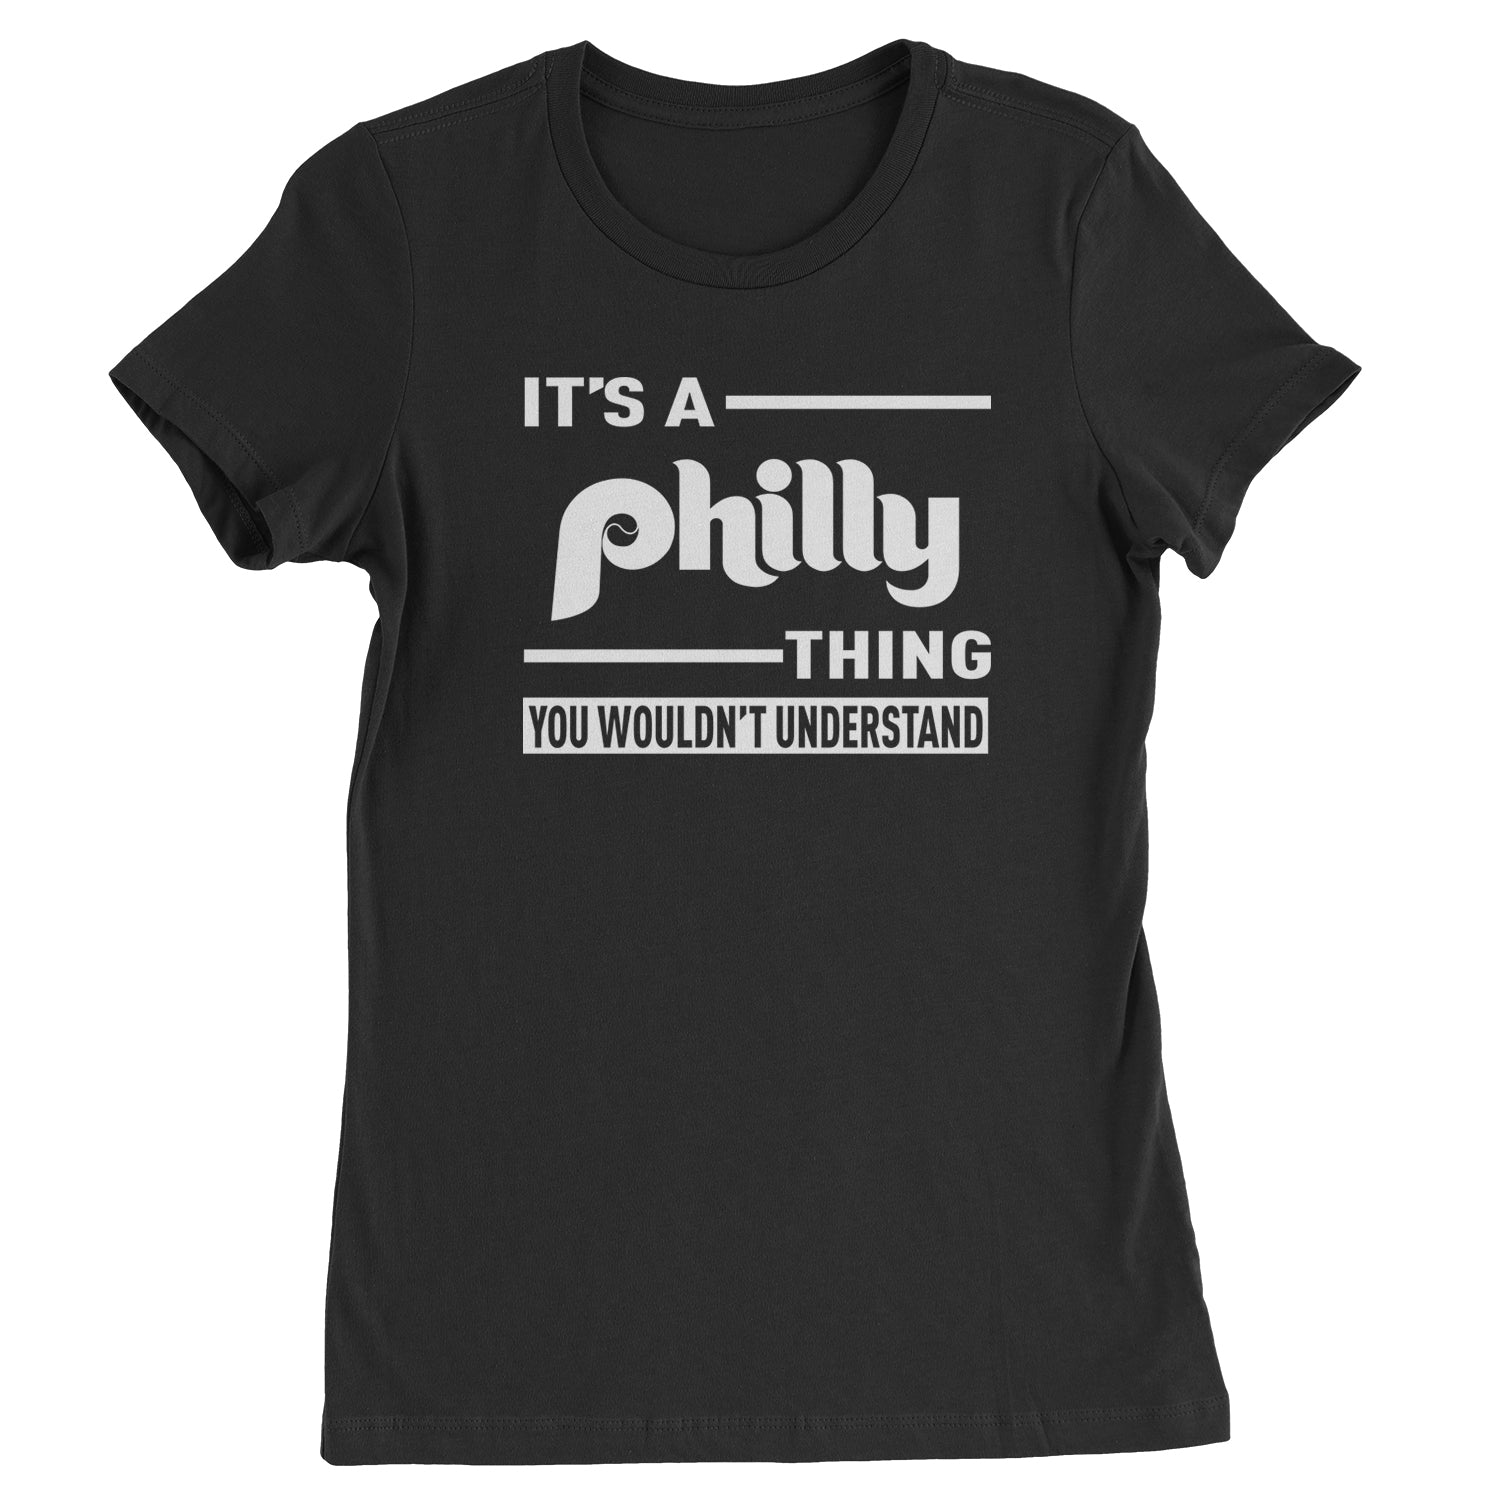 It's A Philly Thing, You Wouldn't Understand Womens T-shirt baseball, filly, football, jawn, morgan, Philadelphia, philli by Expression Tees